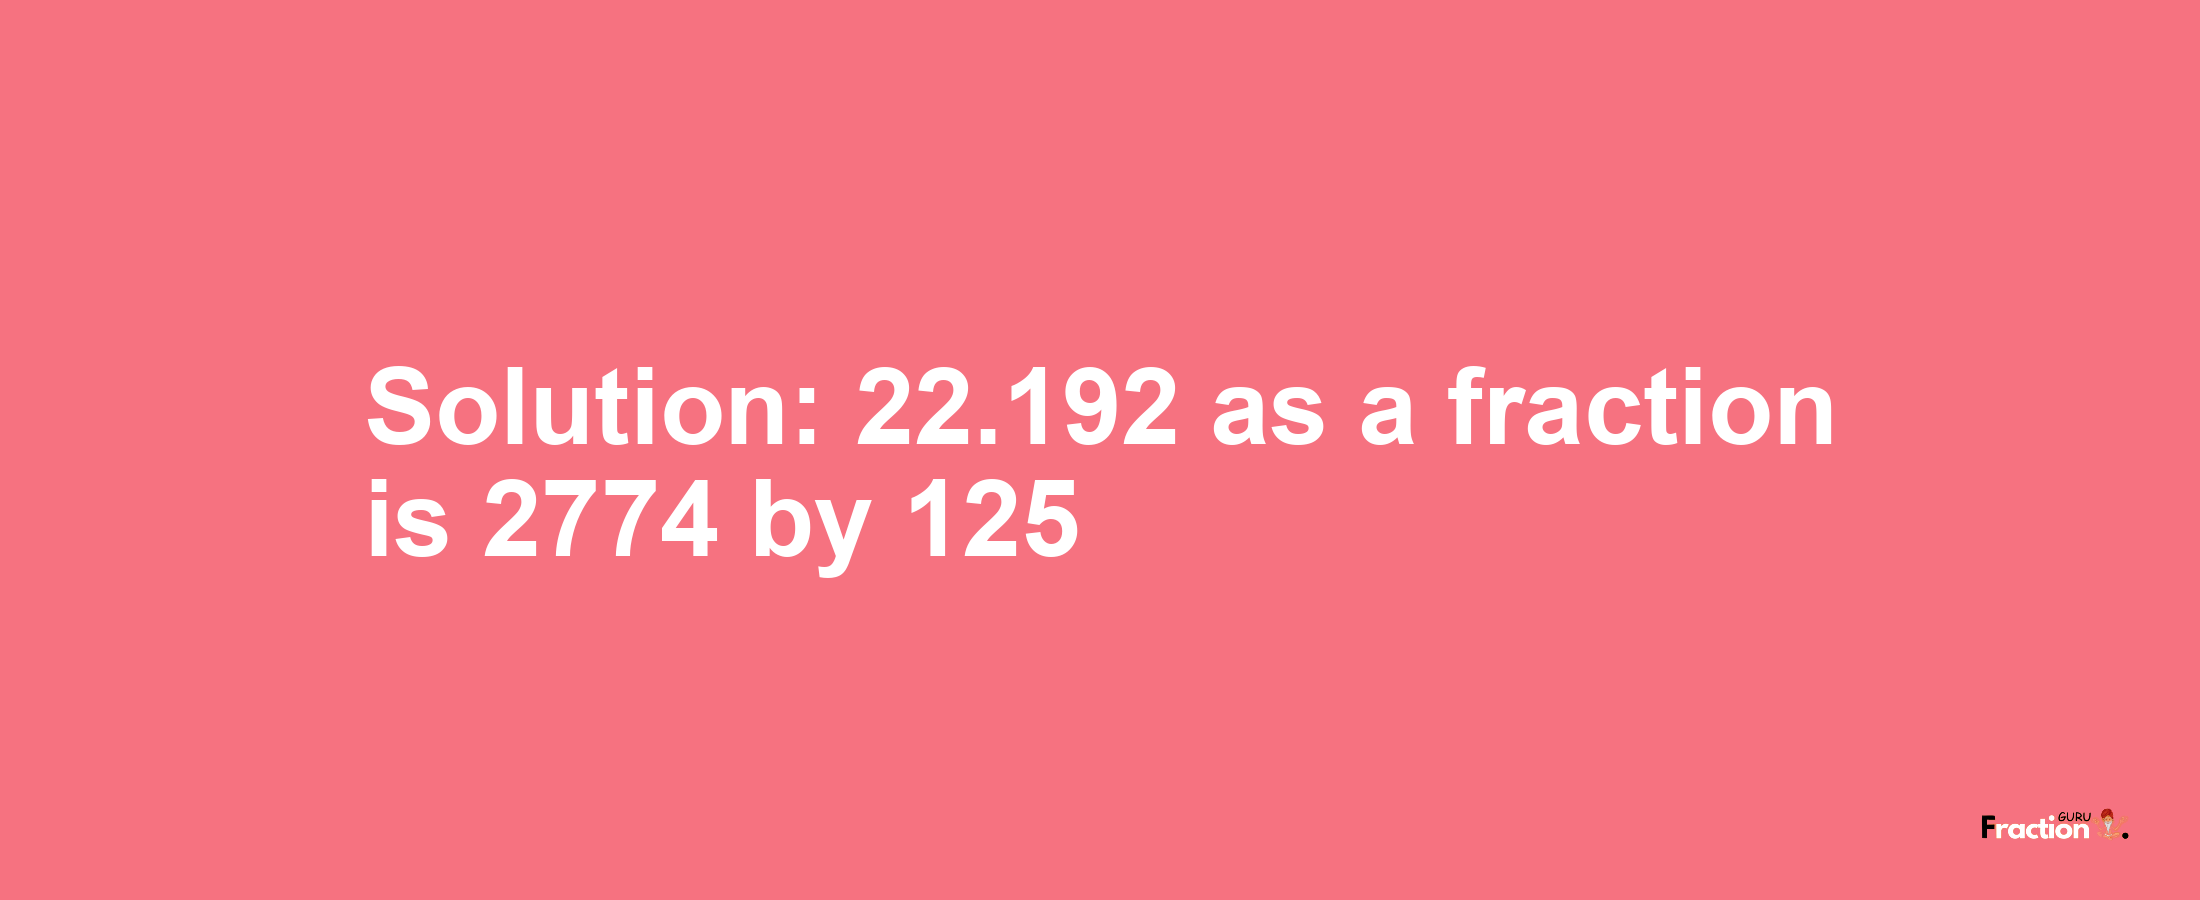 Solution:22.192 as a fraction is 2774/125